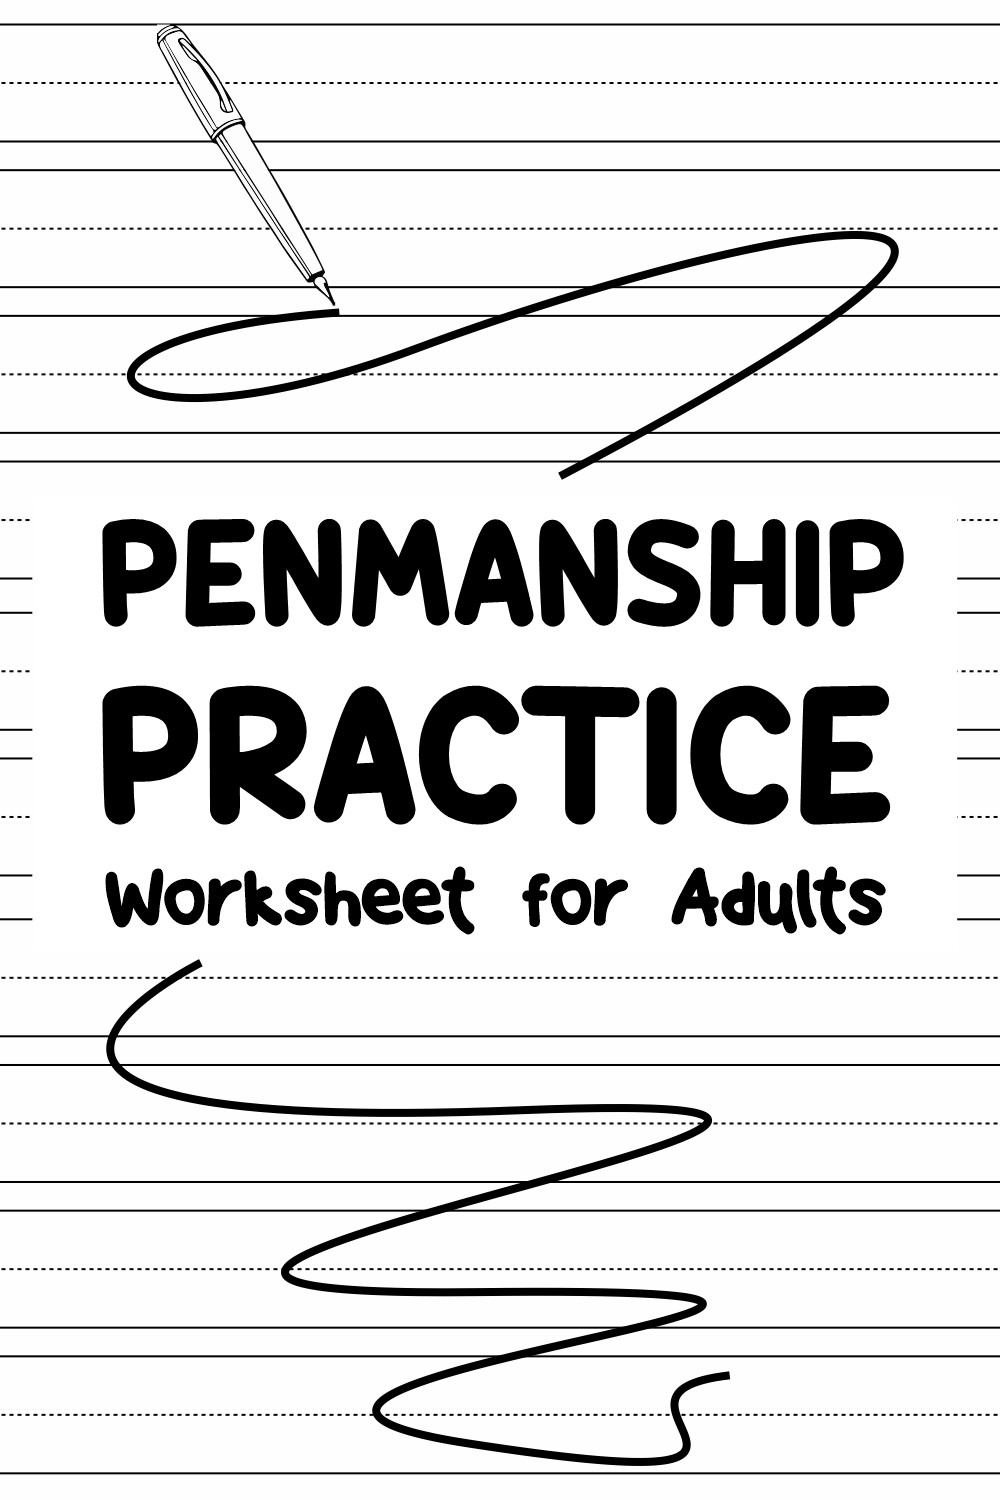 9 Images of Penmanship Practice Worksheets For Adults